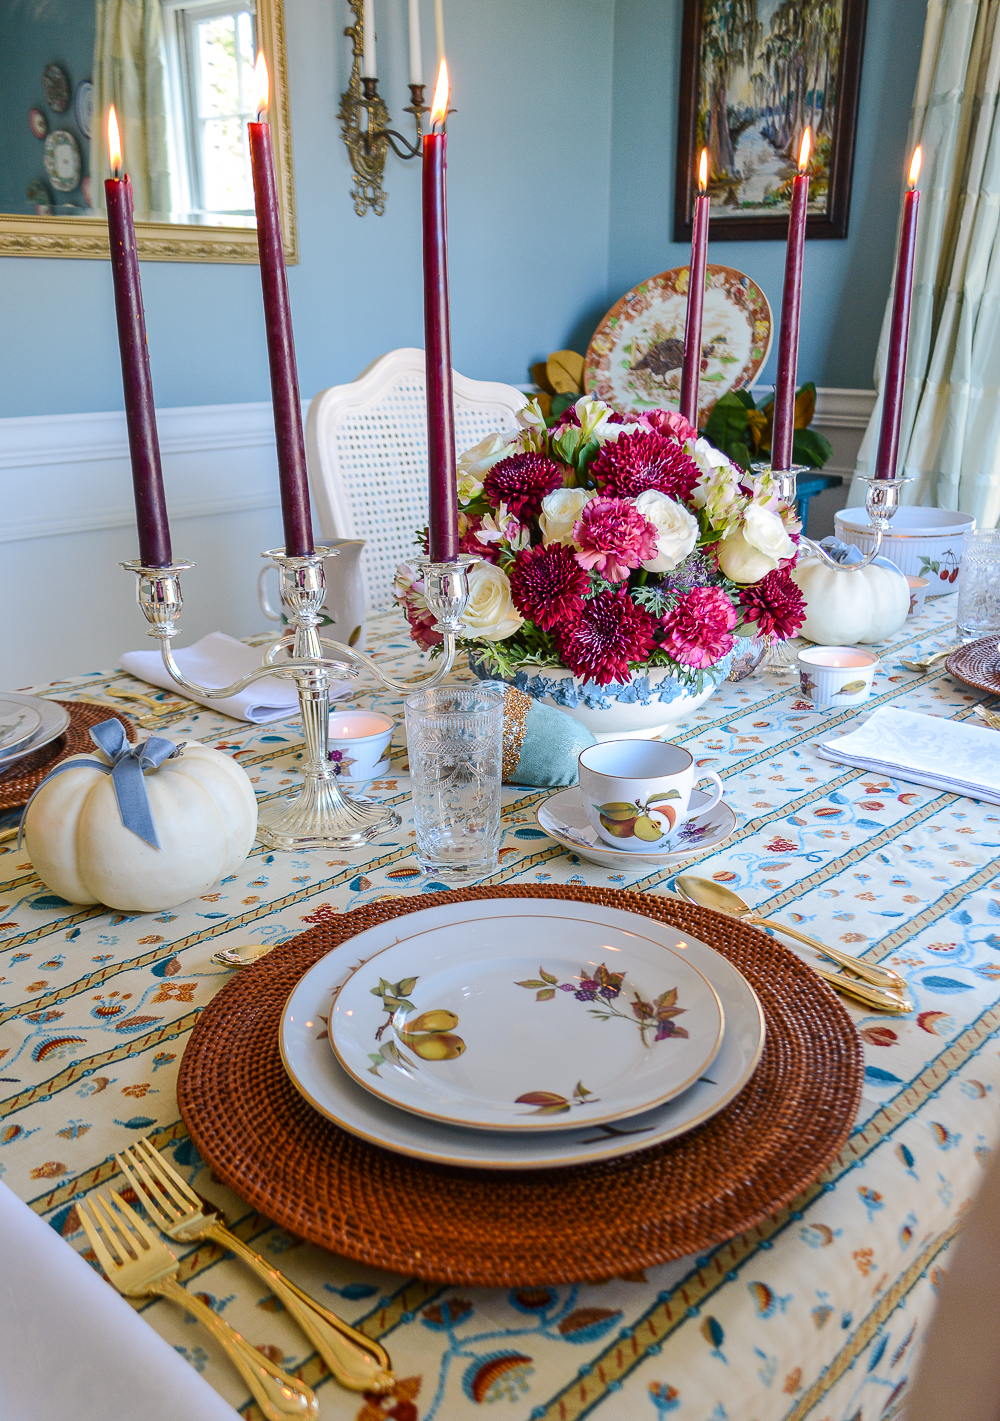 Royal Worcester Evesham dishes with fruit create a lush look on this Grandmillennial Thanksgiving tablescape with brown and blue linen from Schumacher